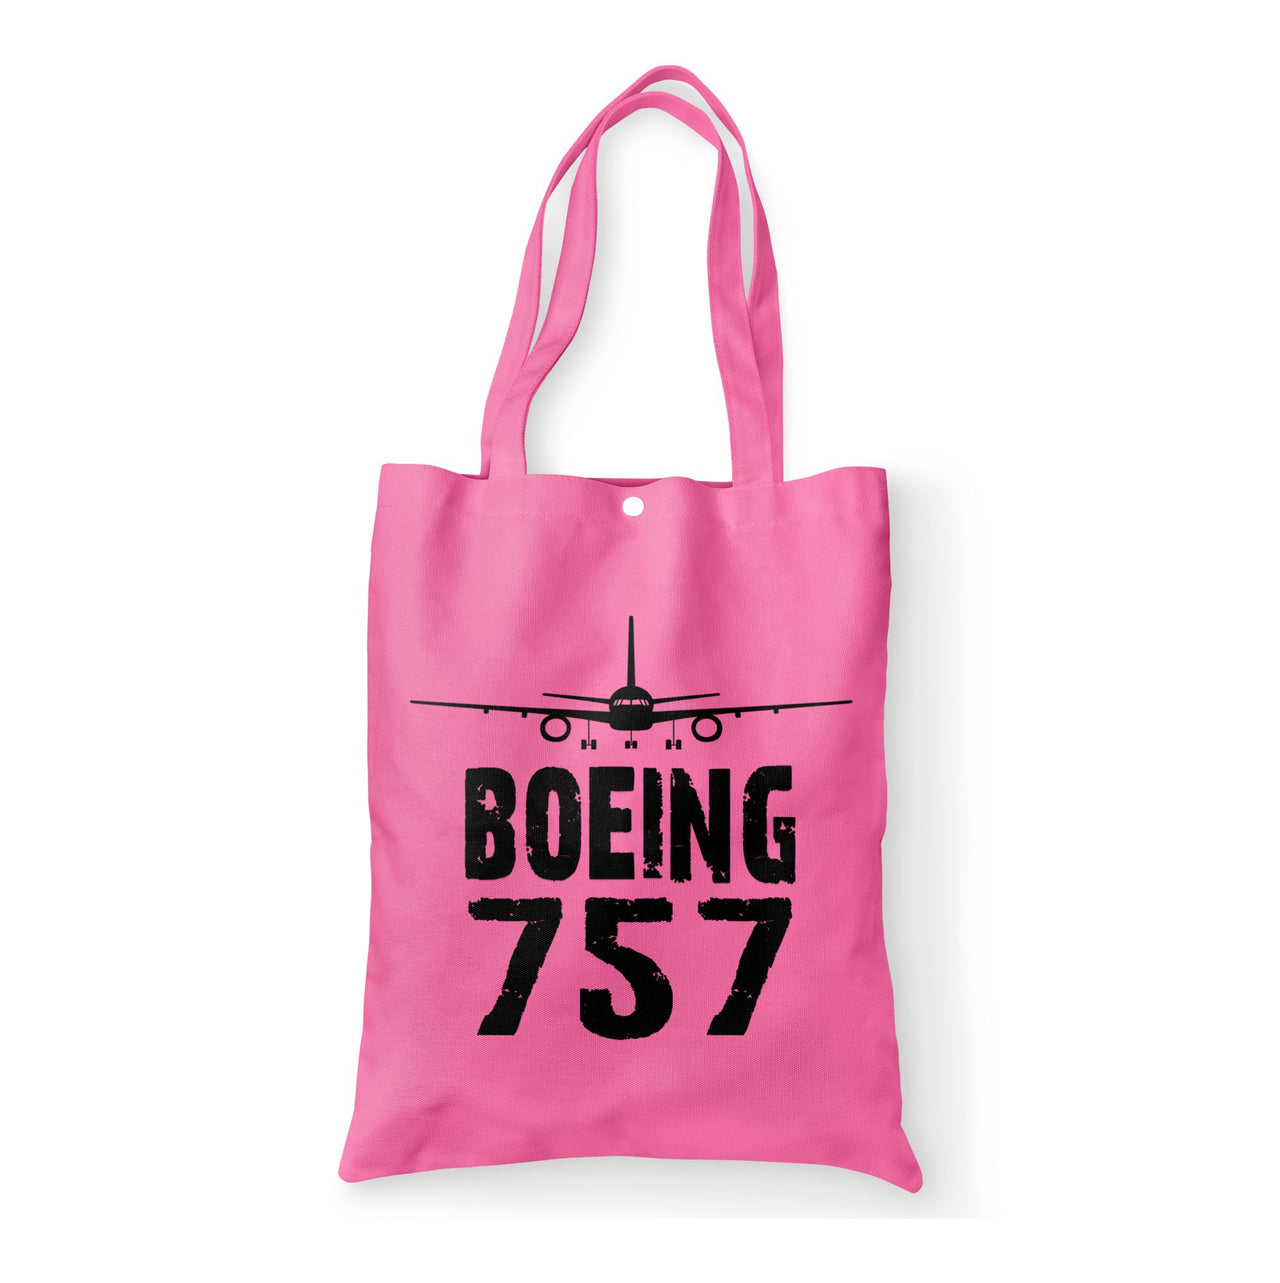 Boeing 757 & Plane Designed Tote Bags